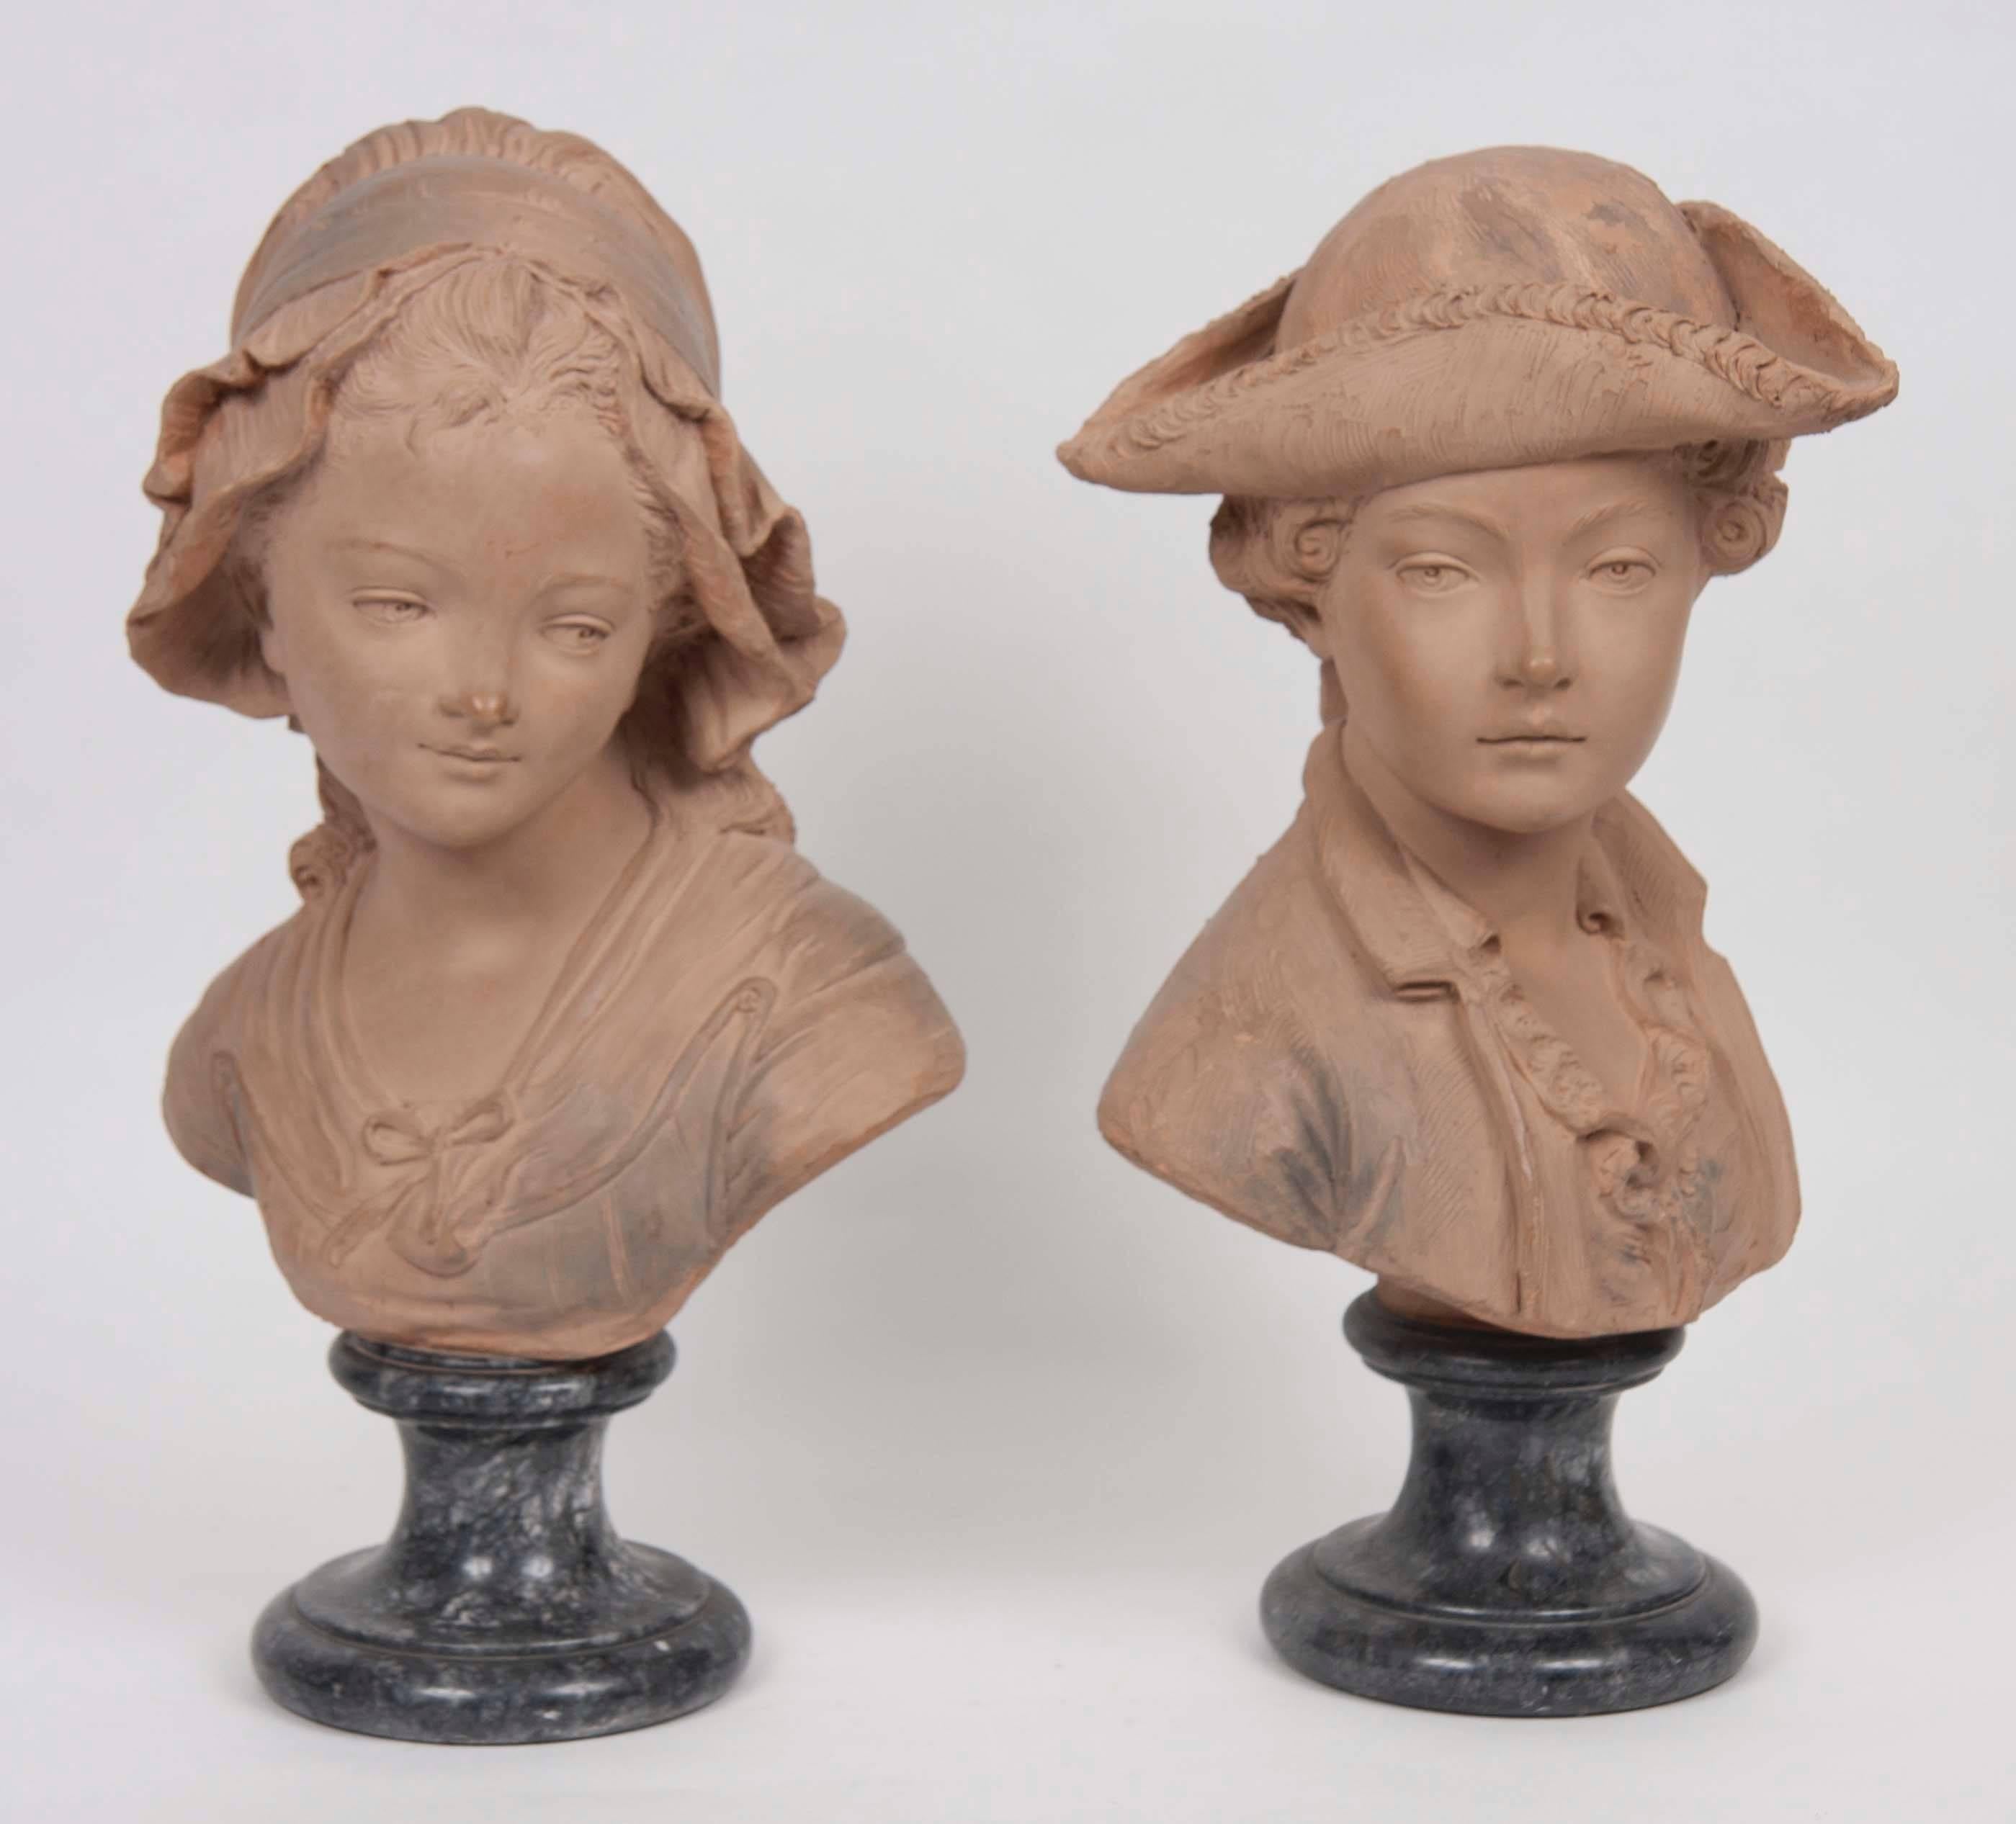 Two French terracotta busts mounted on marble socles,
France, late 19th century.
Signed, Paris. 

Female - H 19 in.; W 10in.; D 6 in.
Male - H 19 in.; W 12 in.; D 8.5 in.